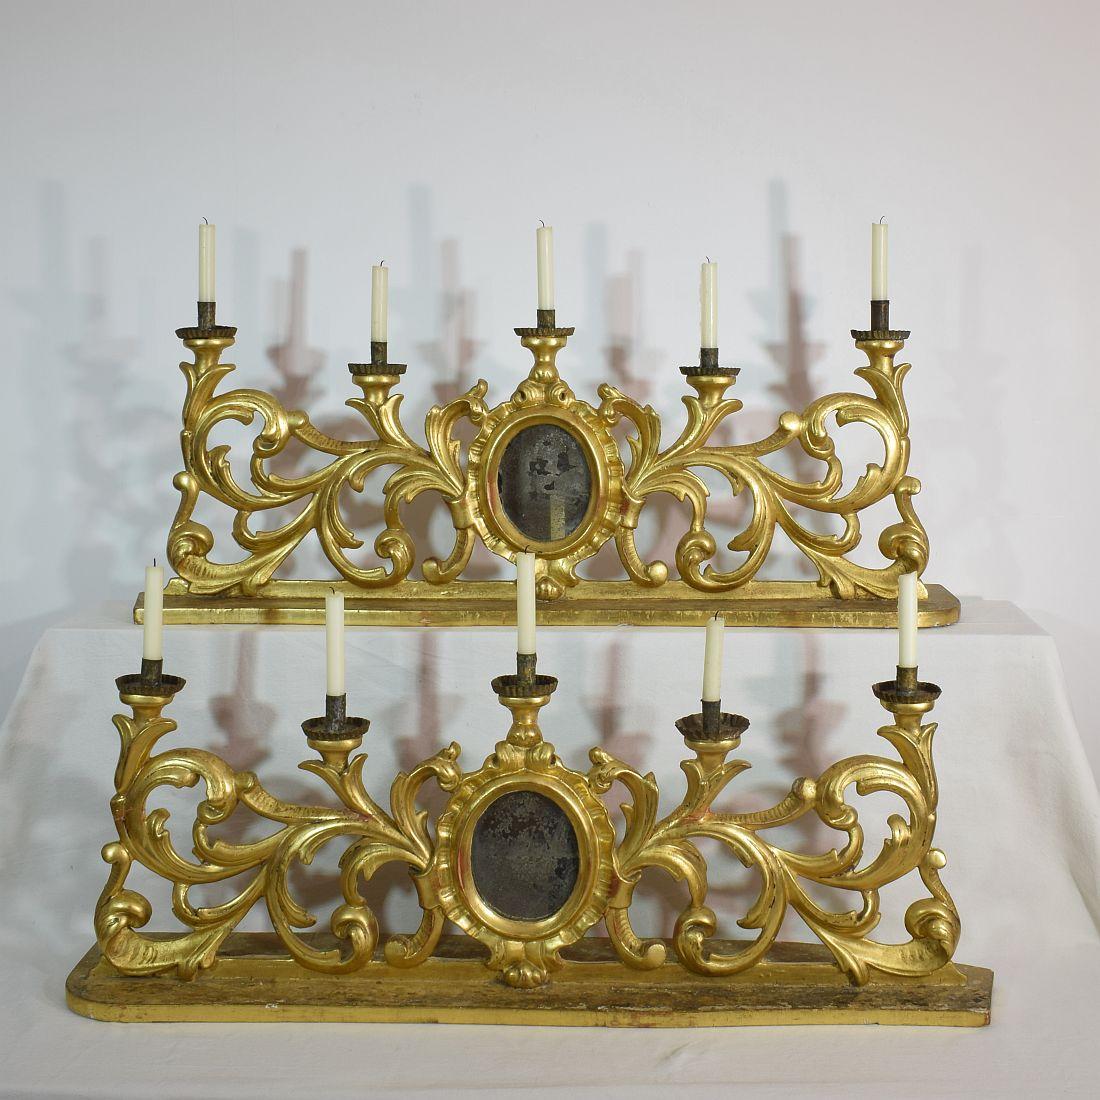 Unique Baroque giltwood candleholders for in total 10 candles, Italy, circa 1750-1780. Weathered, repairs and losses.
More pictures available on request. Measurement individual.